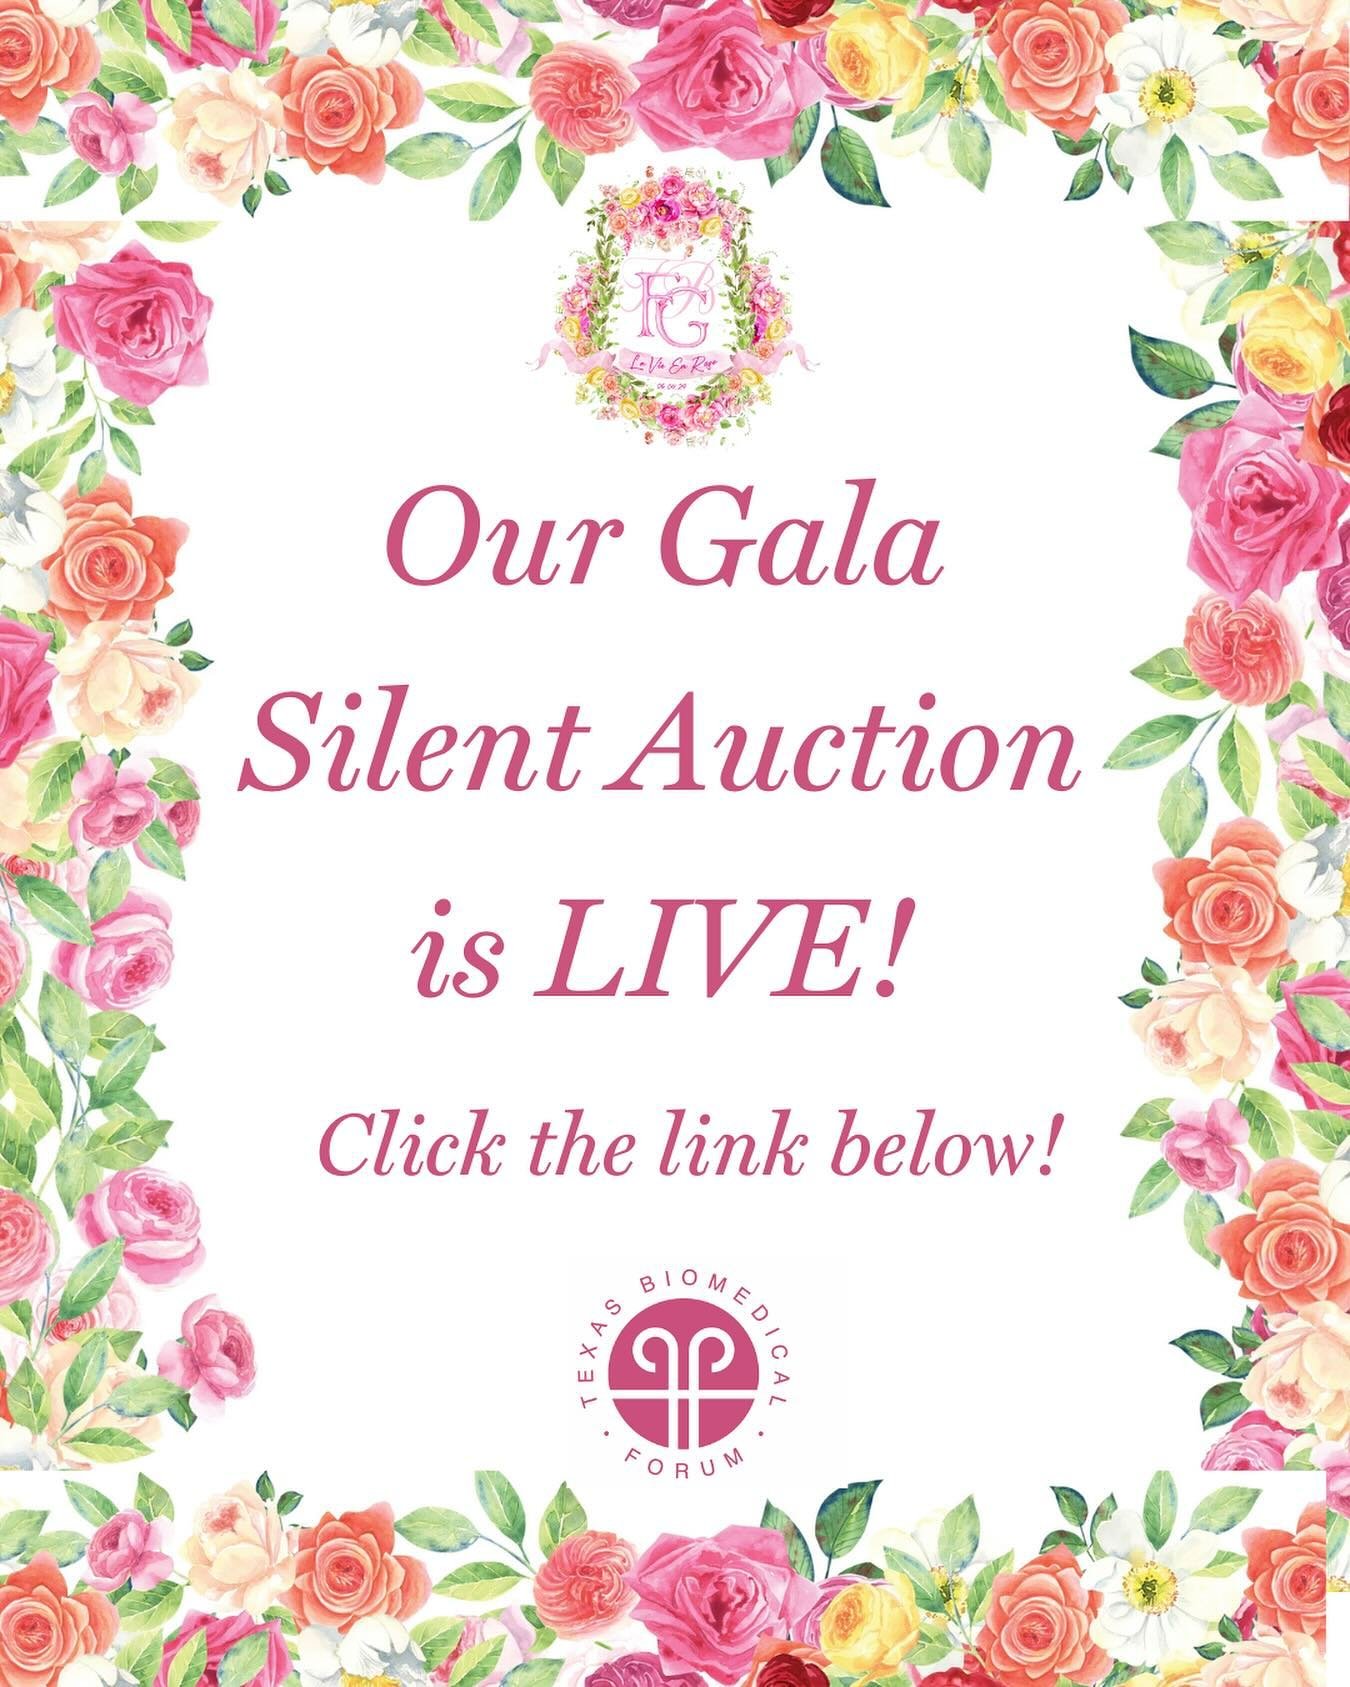 Our Silent Auction is LIVE! Get your bids in! 
You do not need to be present at the Gala to win, so this is a great for all Forum supporters to participate in making our Gala a success. The auction will remain open until Sunday, May 5th, at 3pm. Happ